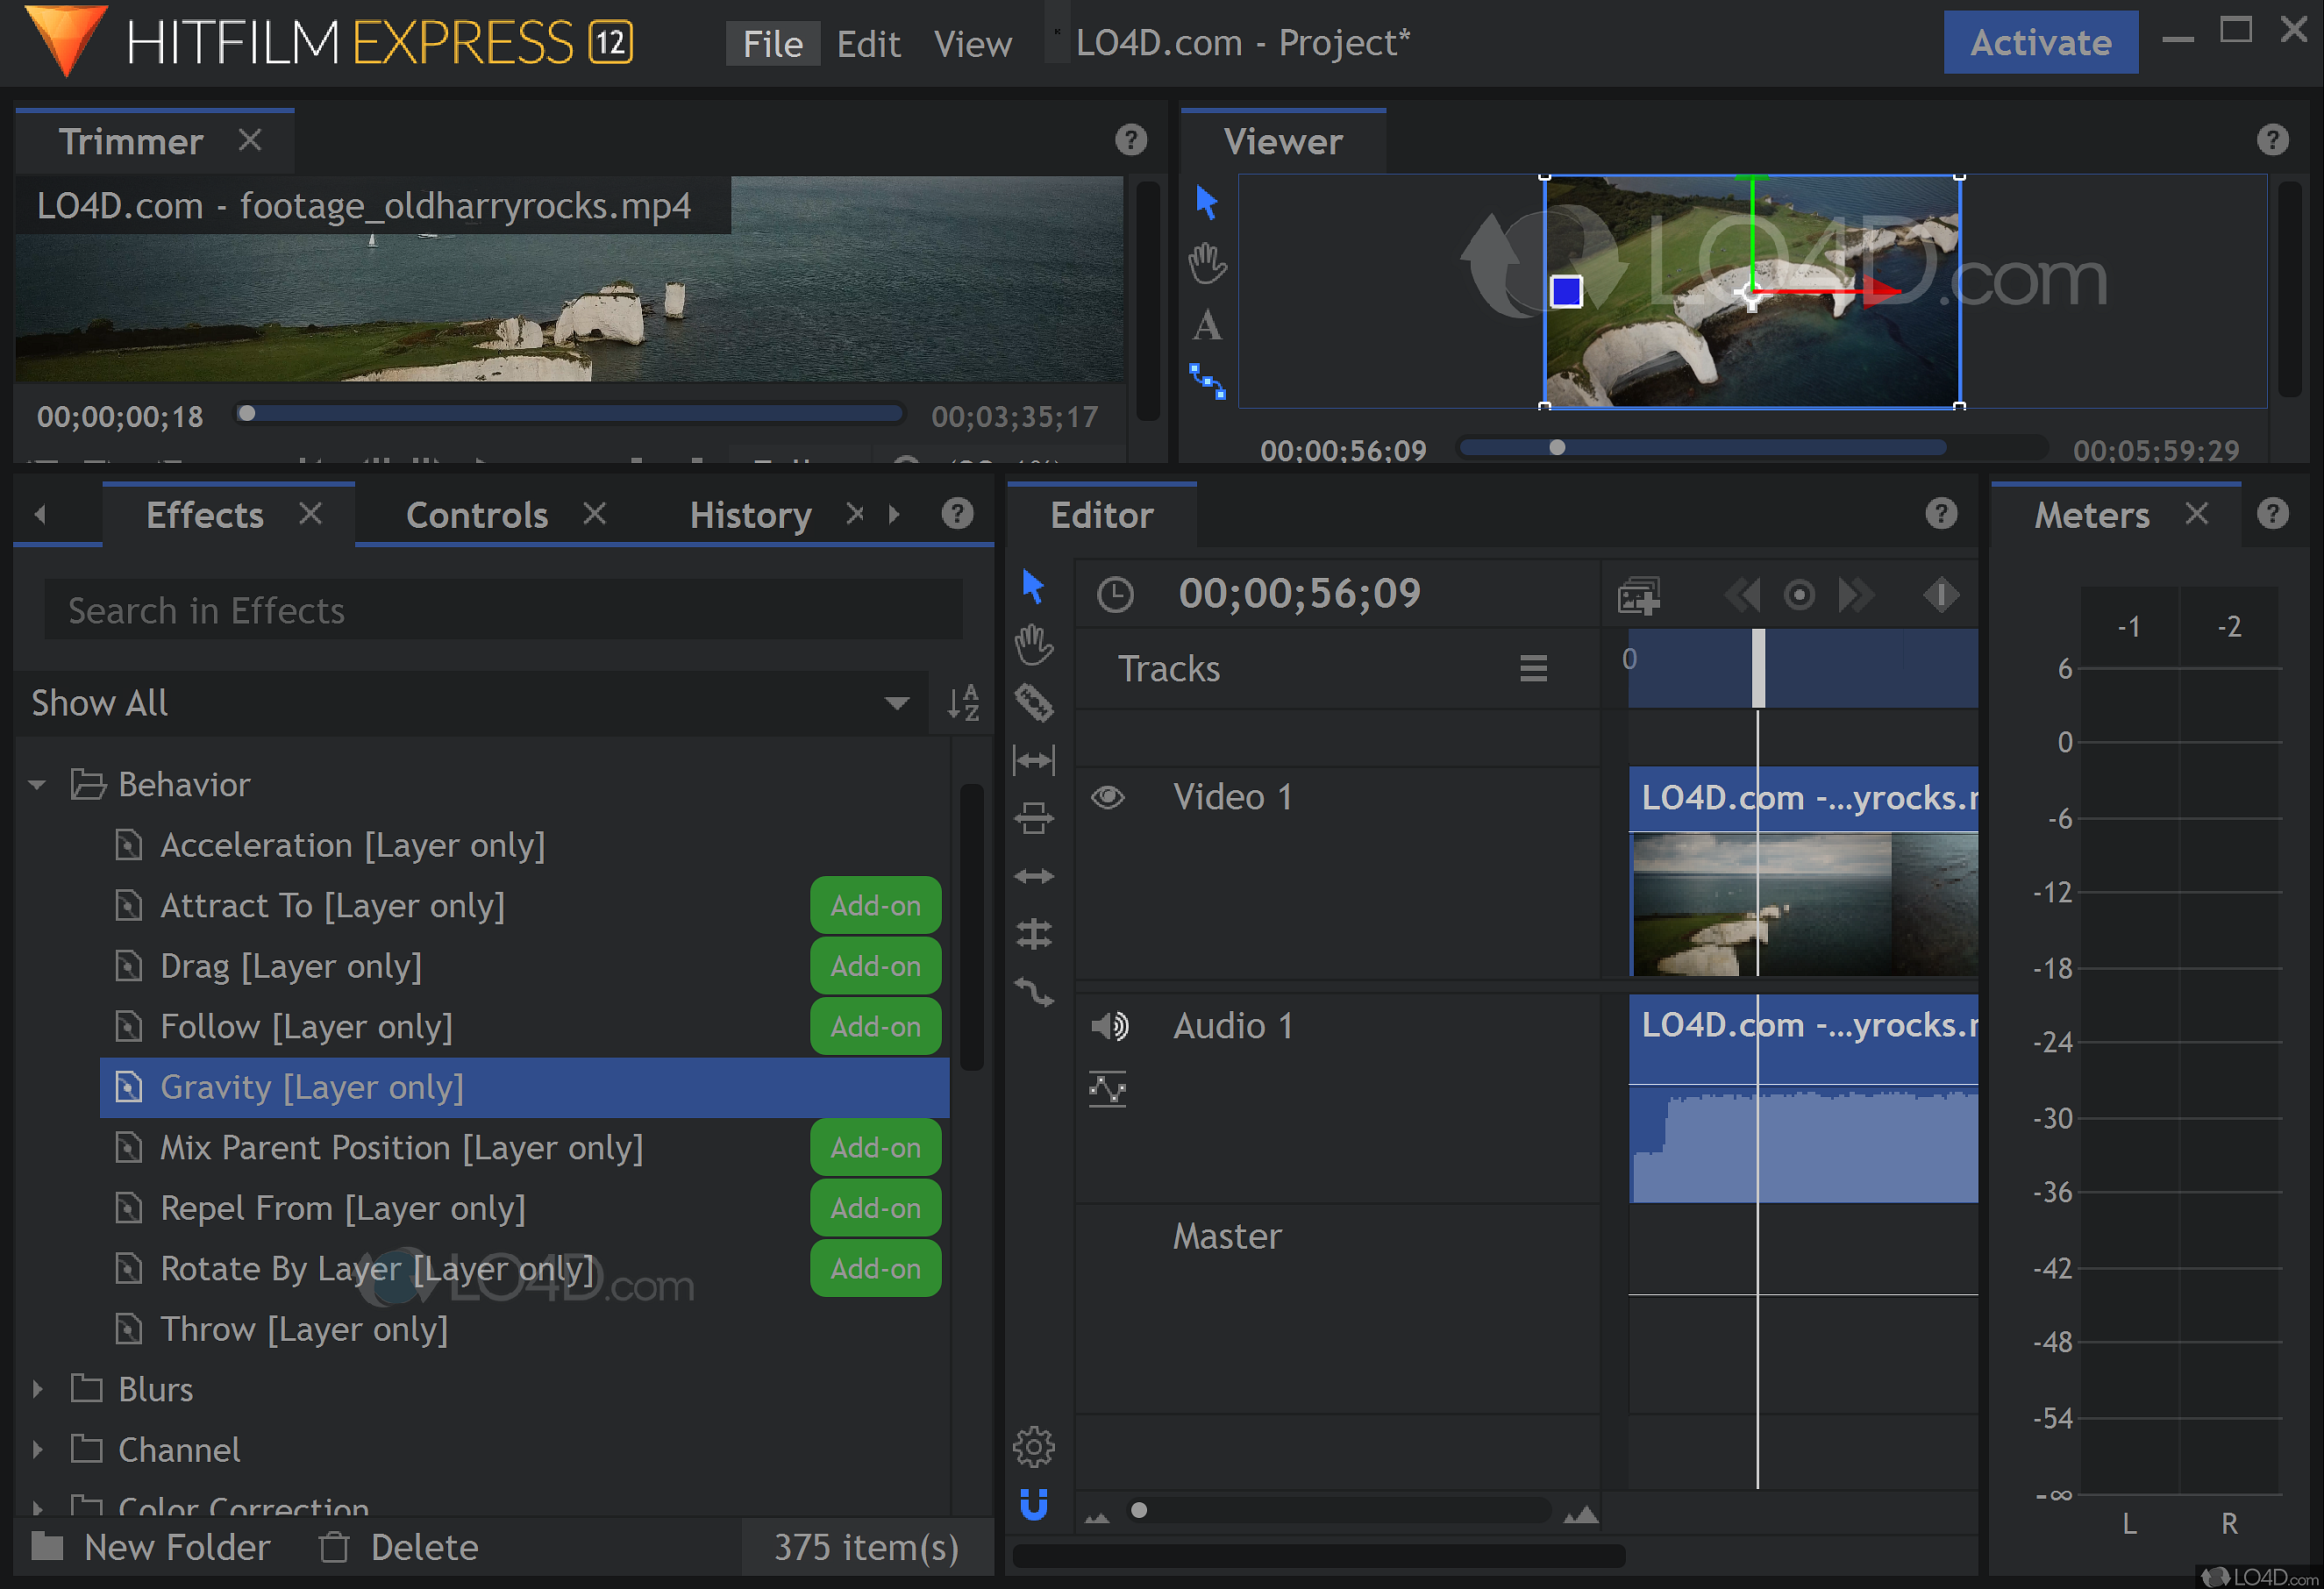 hitfilm express free download for windows 10